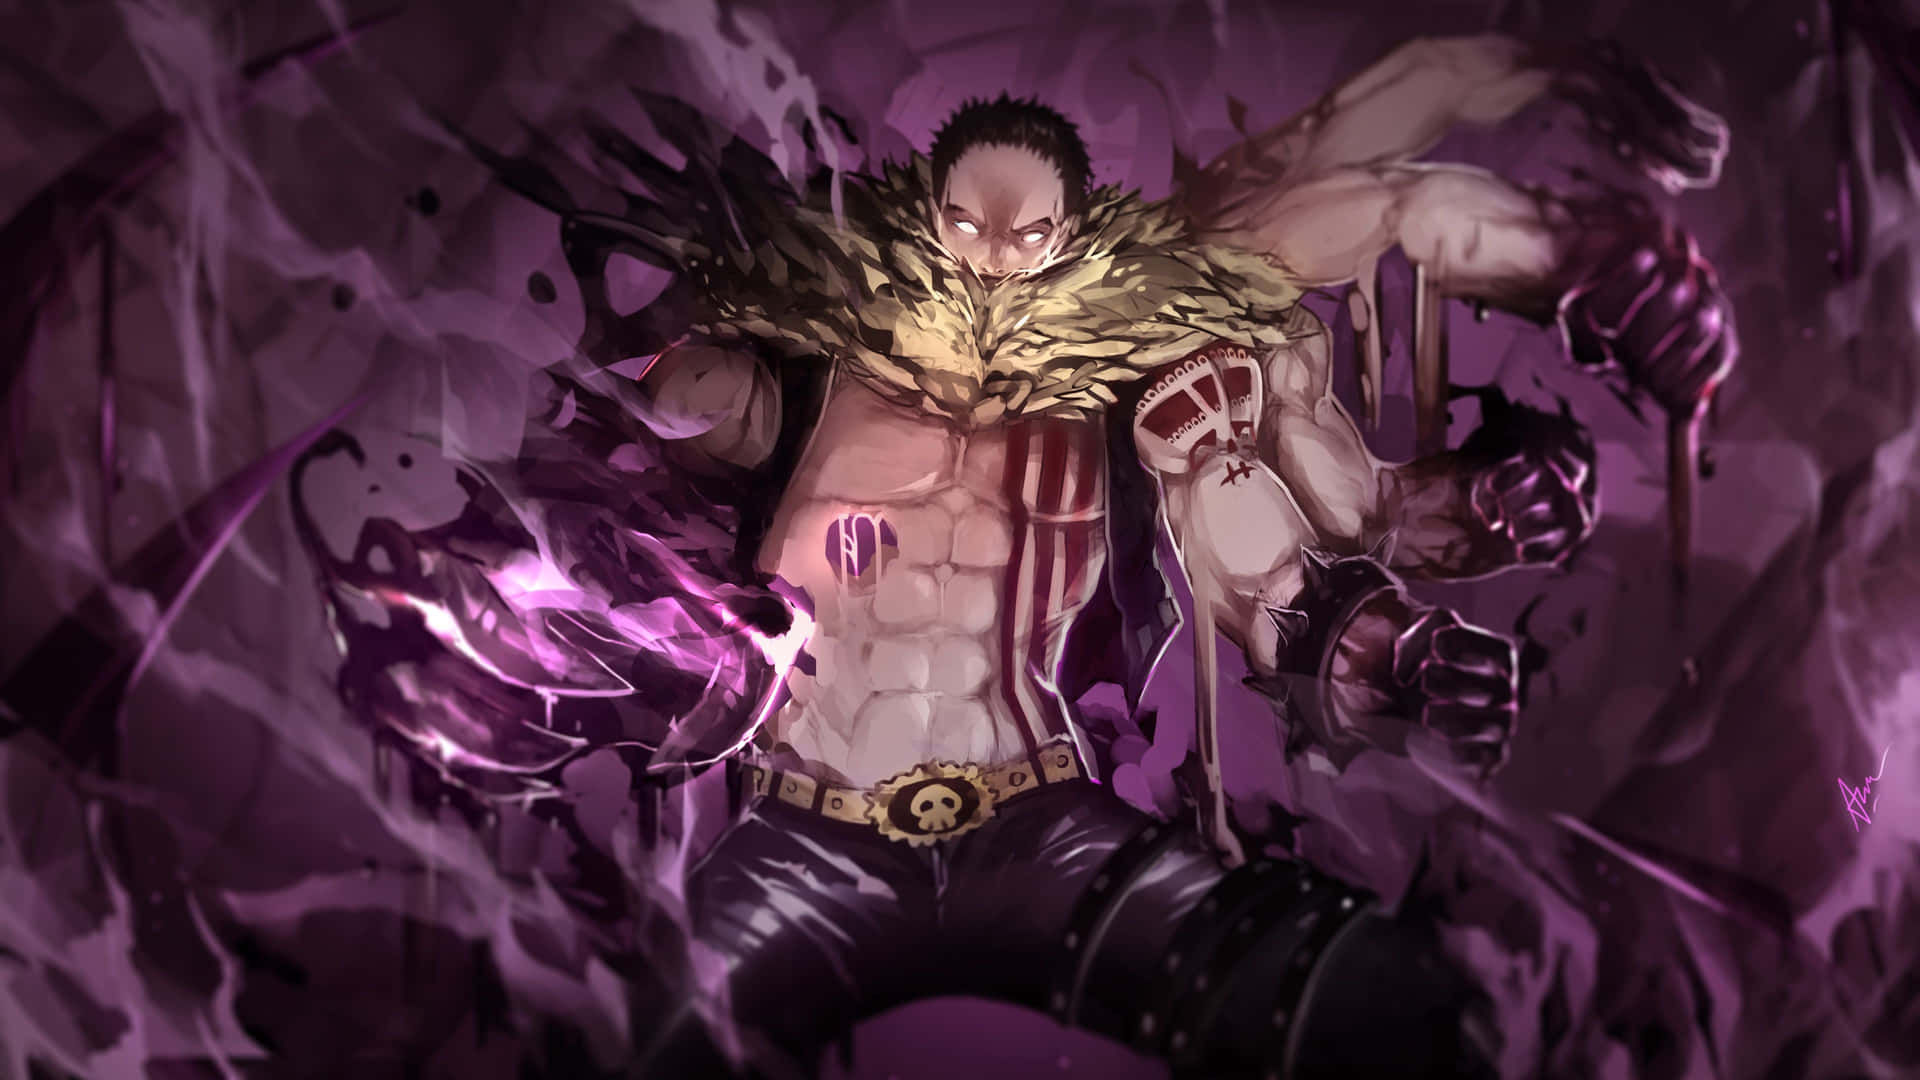 Charlotte Katakuri One Piece anime character in an epic fighting pose. Wallpaper